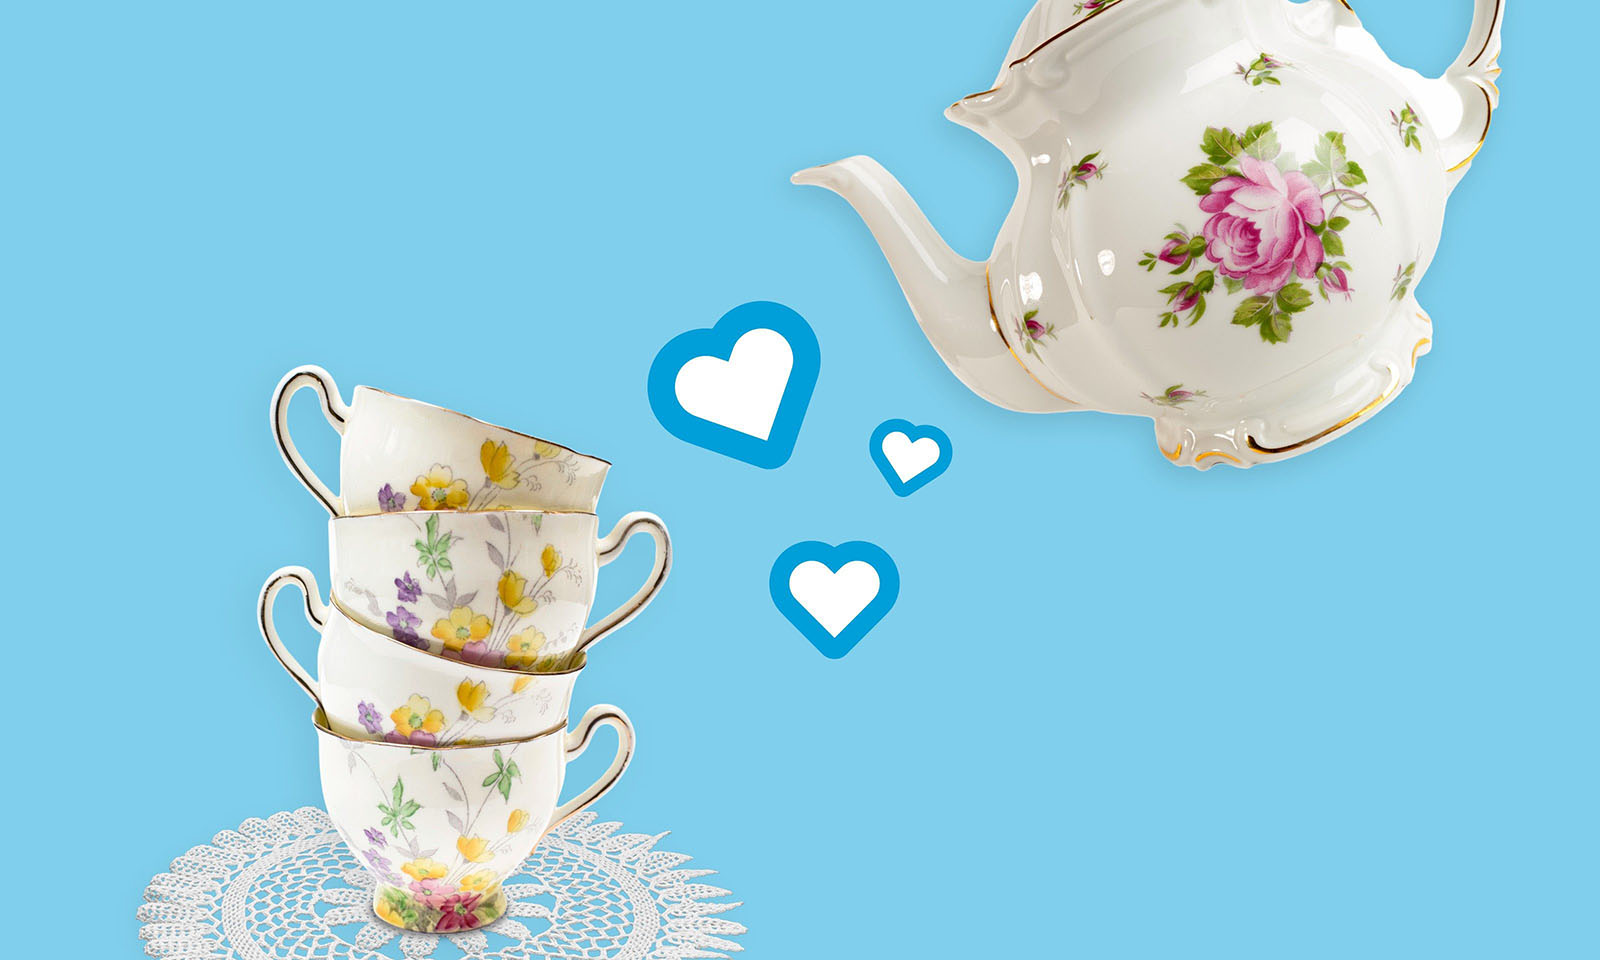 Teapot pouring love hearts into teacups